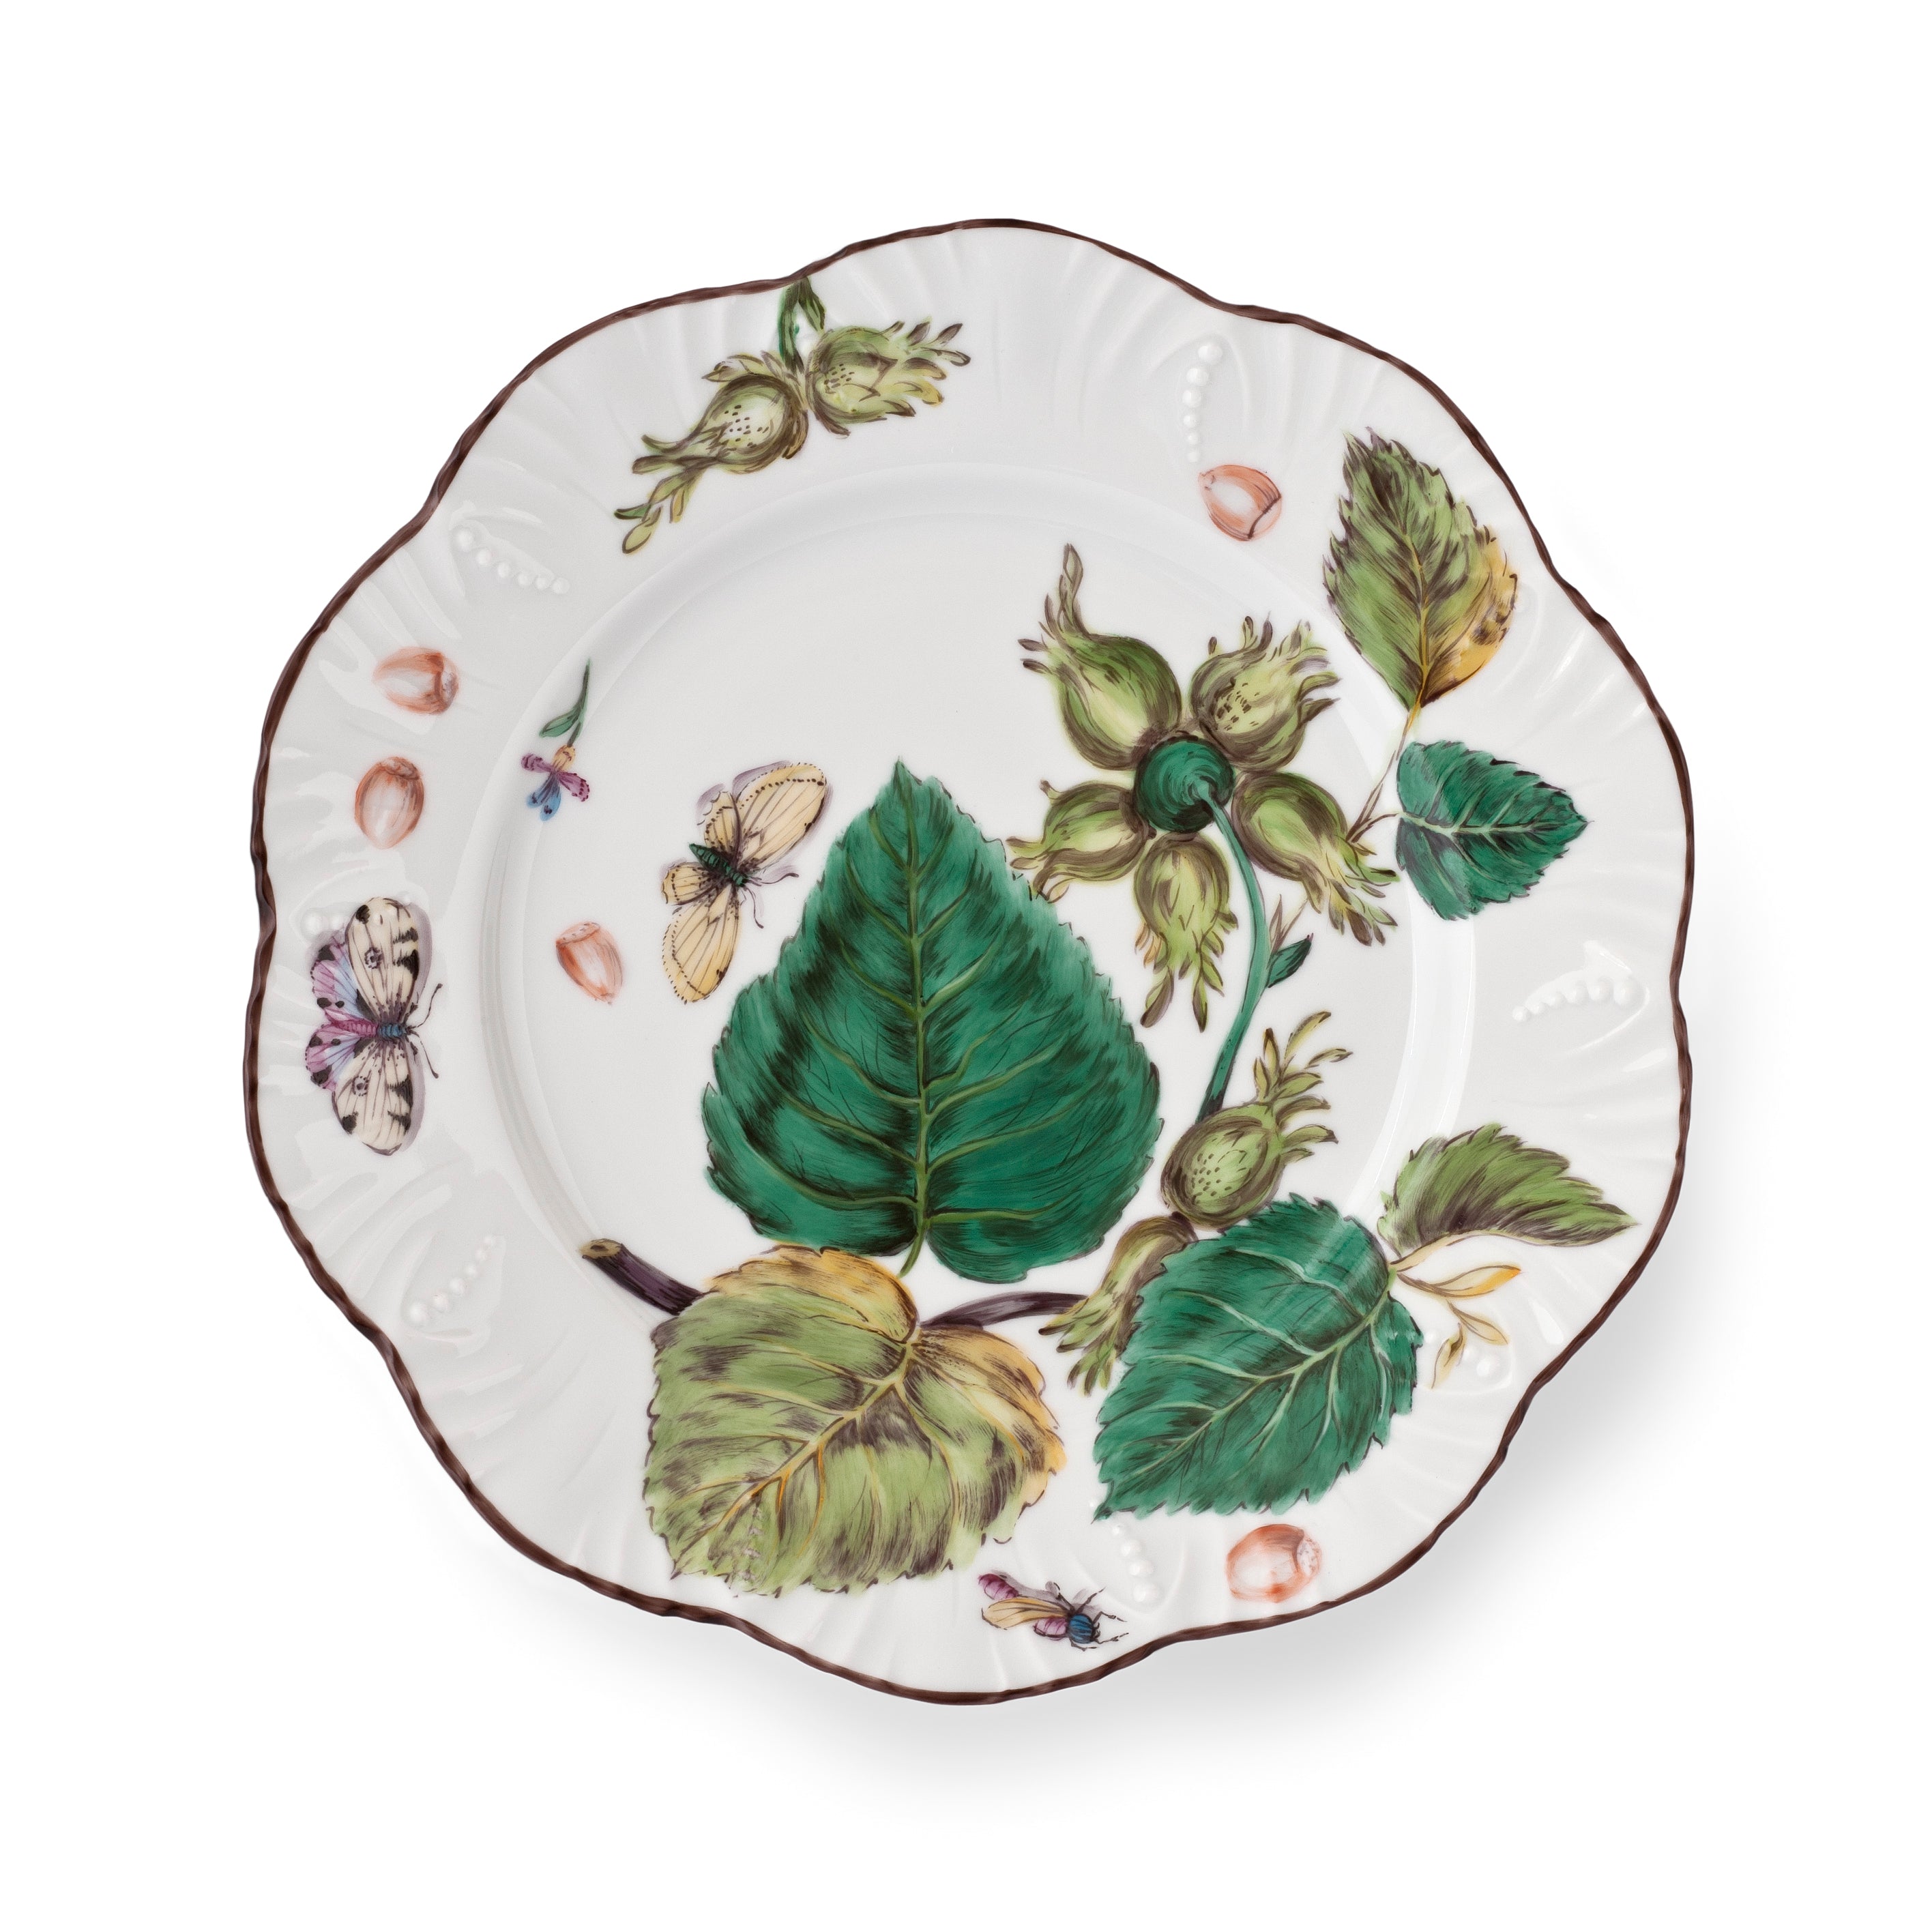 Feuillages - Dinner plate 08